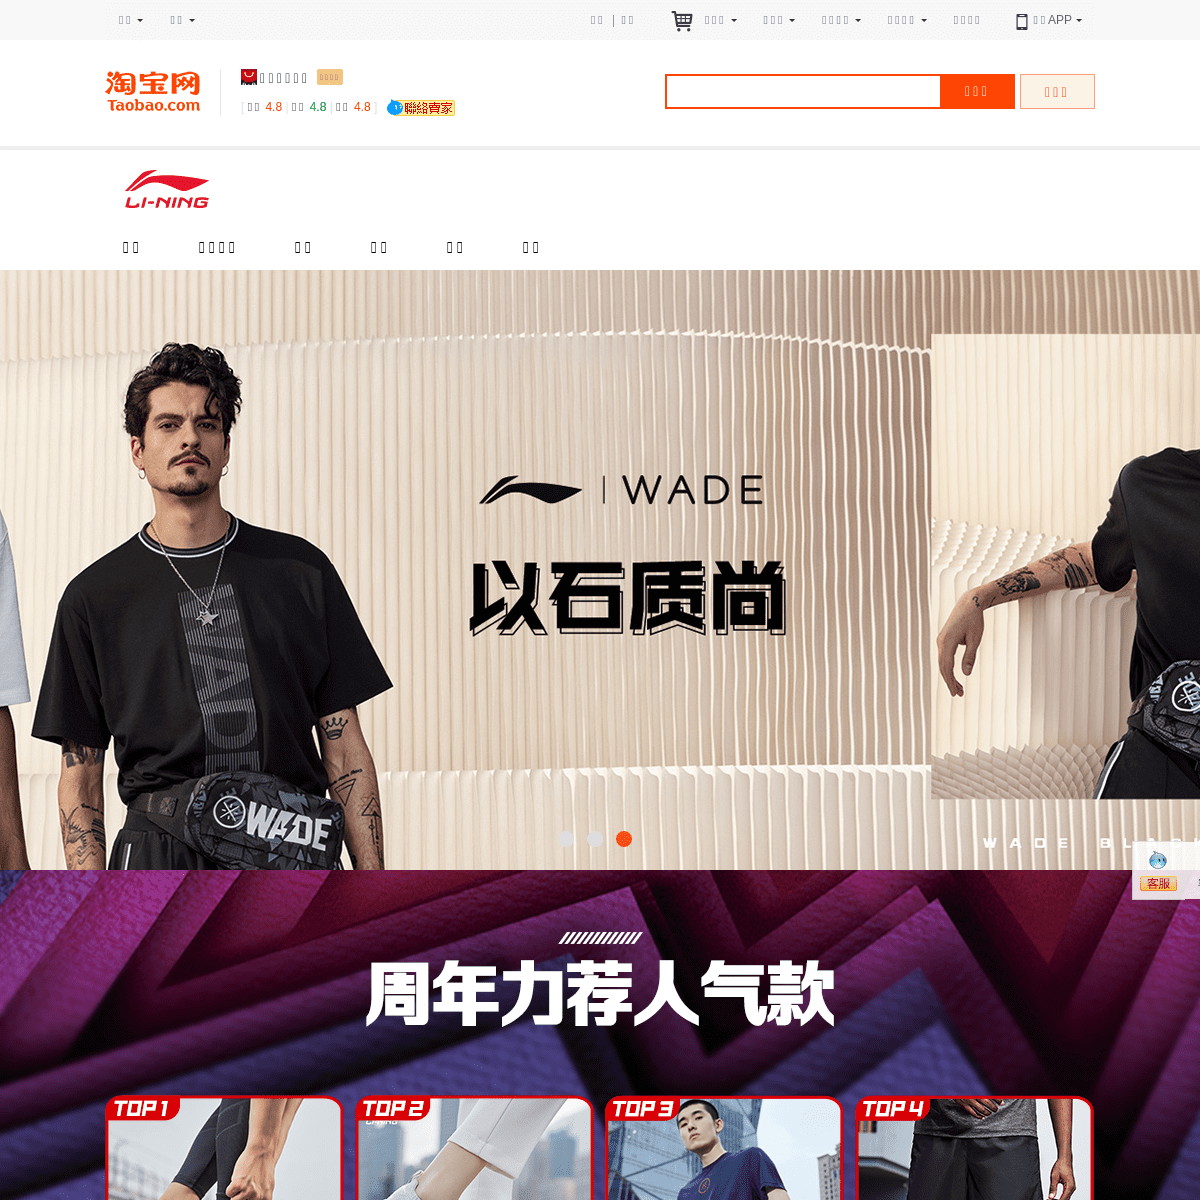 A complete backup of lining.tmall.com